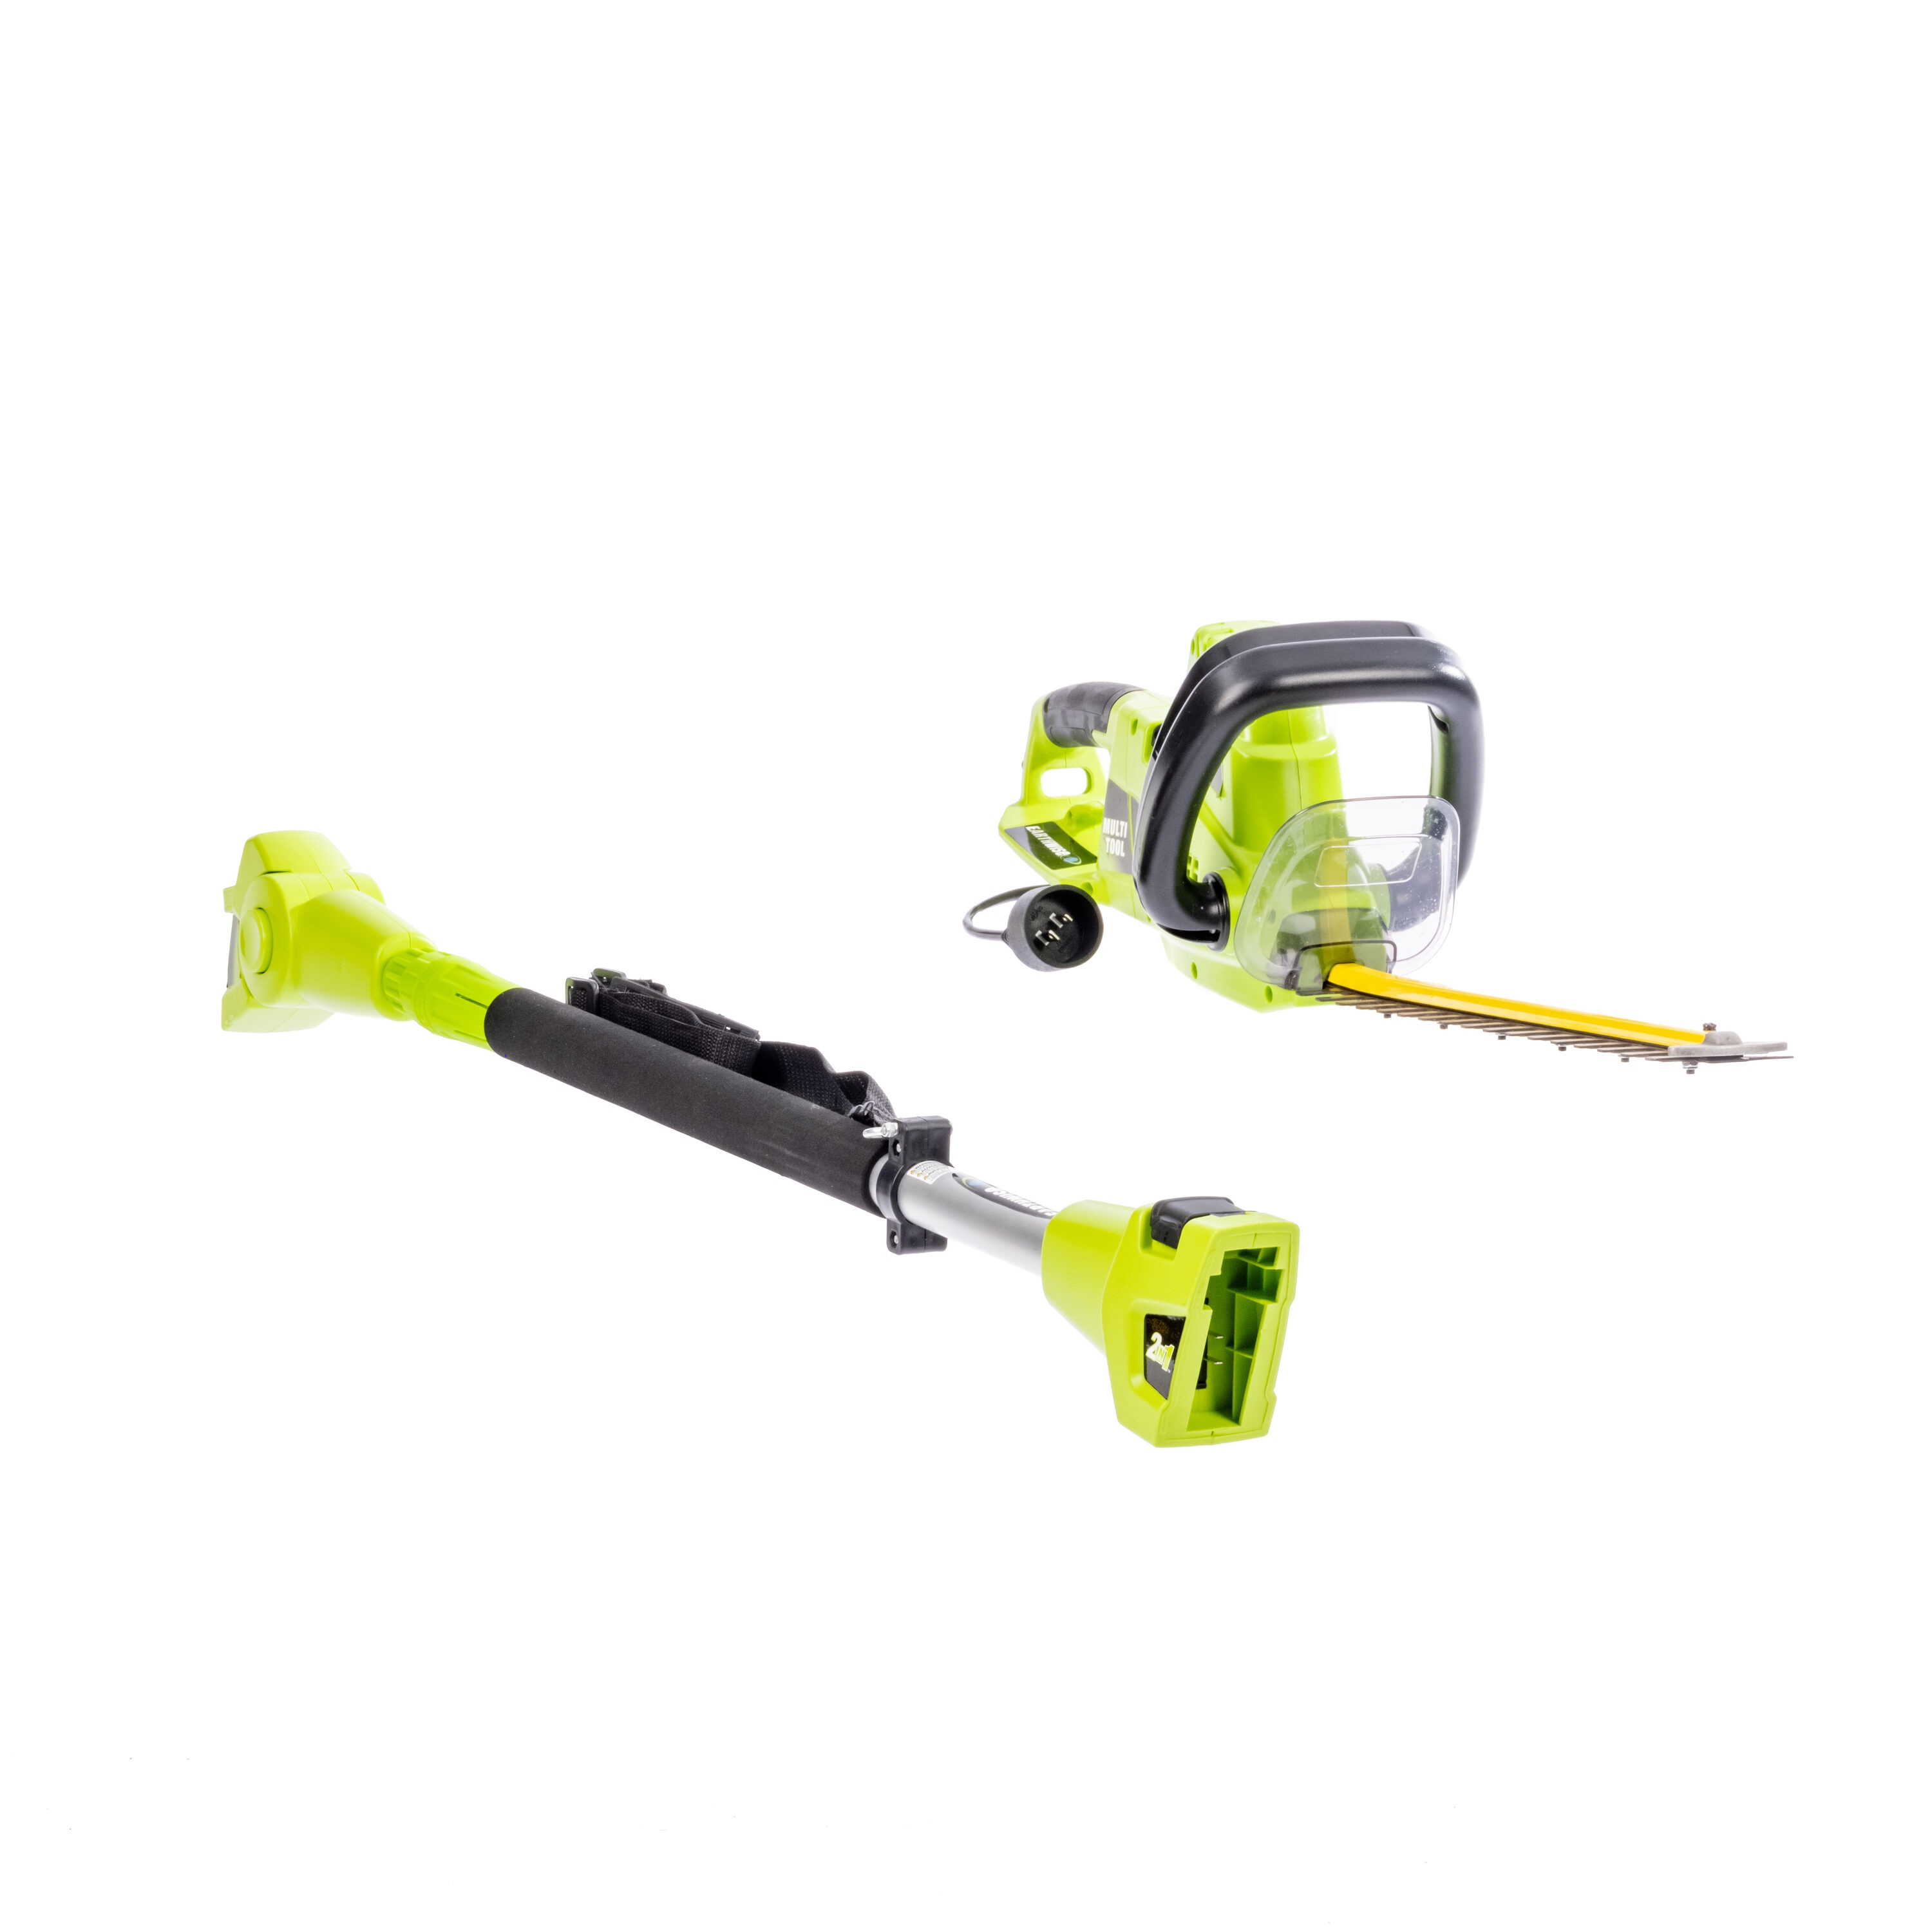 Earthwise CVPH43018 2-in-1 Convertible Pole Hedge Trimmer, 1 - Food 4 Less